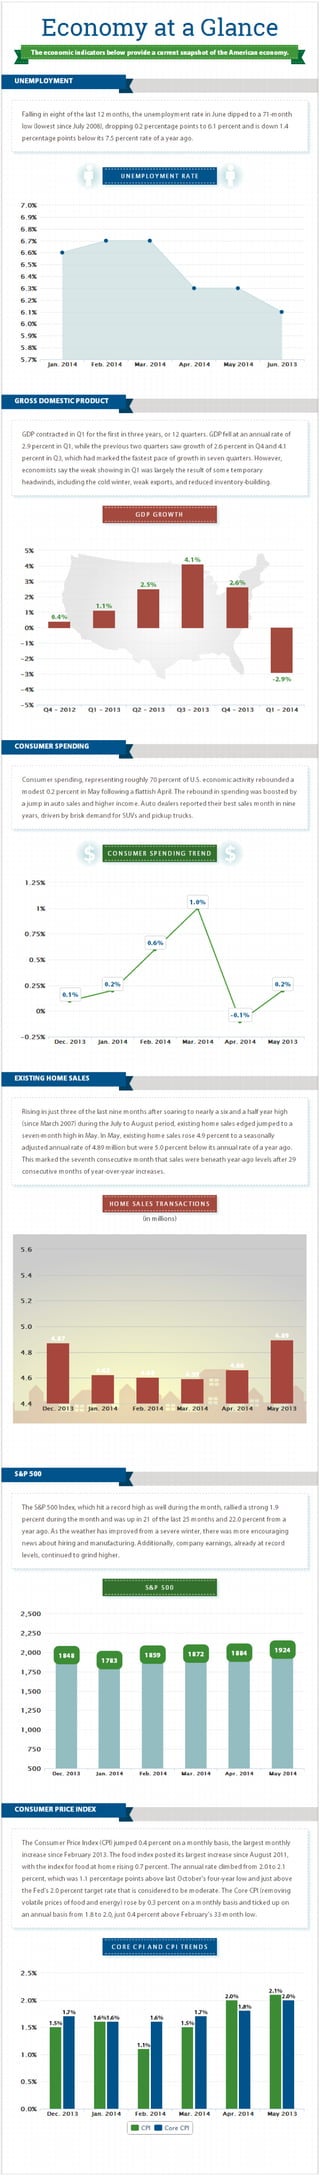 Economy at a Glance: July 2014 [Infographic]